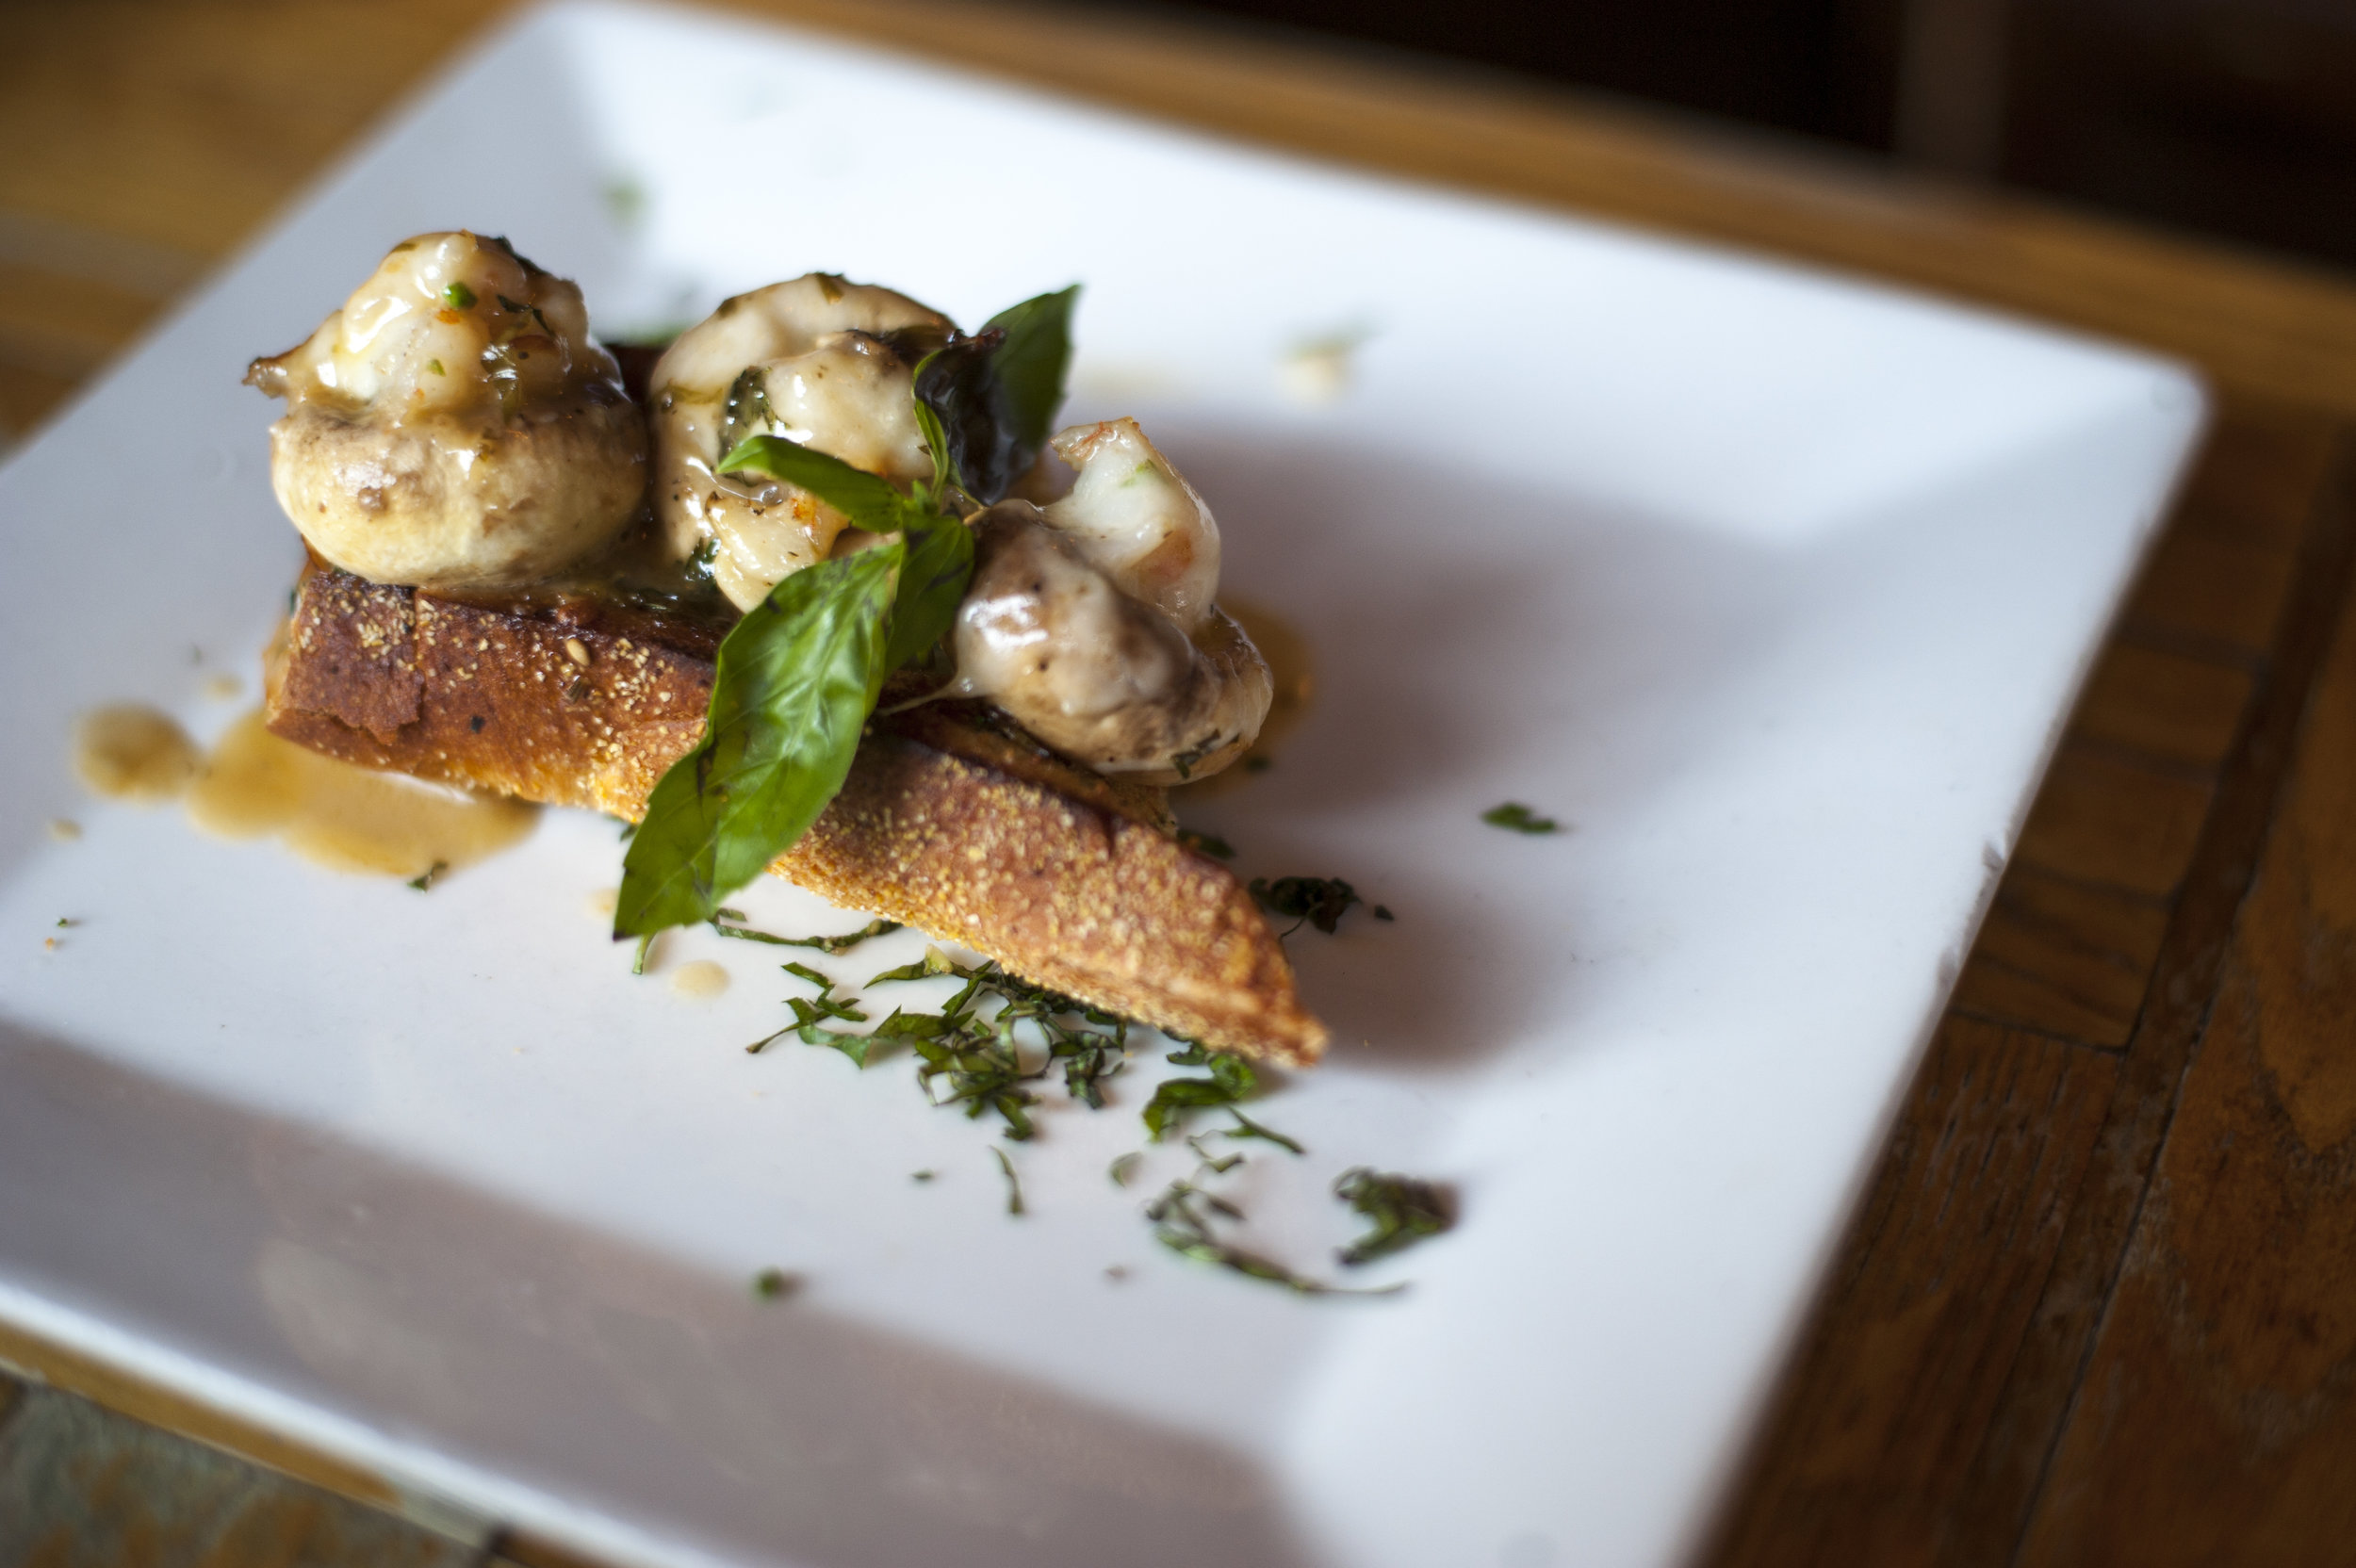  The Shrimp Cargot is drizzled with garlic lemon sauce, serving up deliciously savory shrimp stuffed into a mushroom, atop a country bread crostini. 